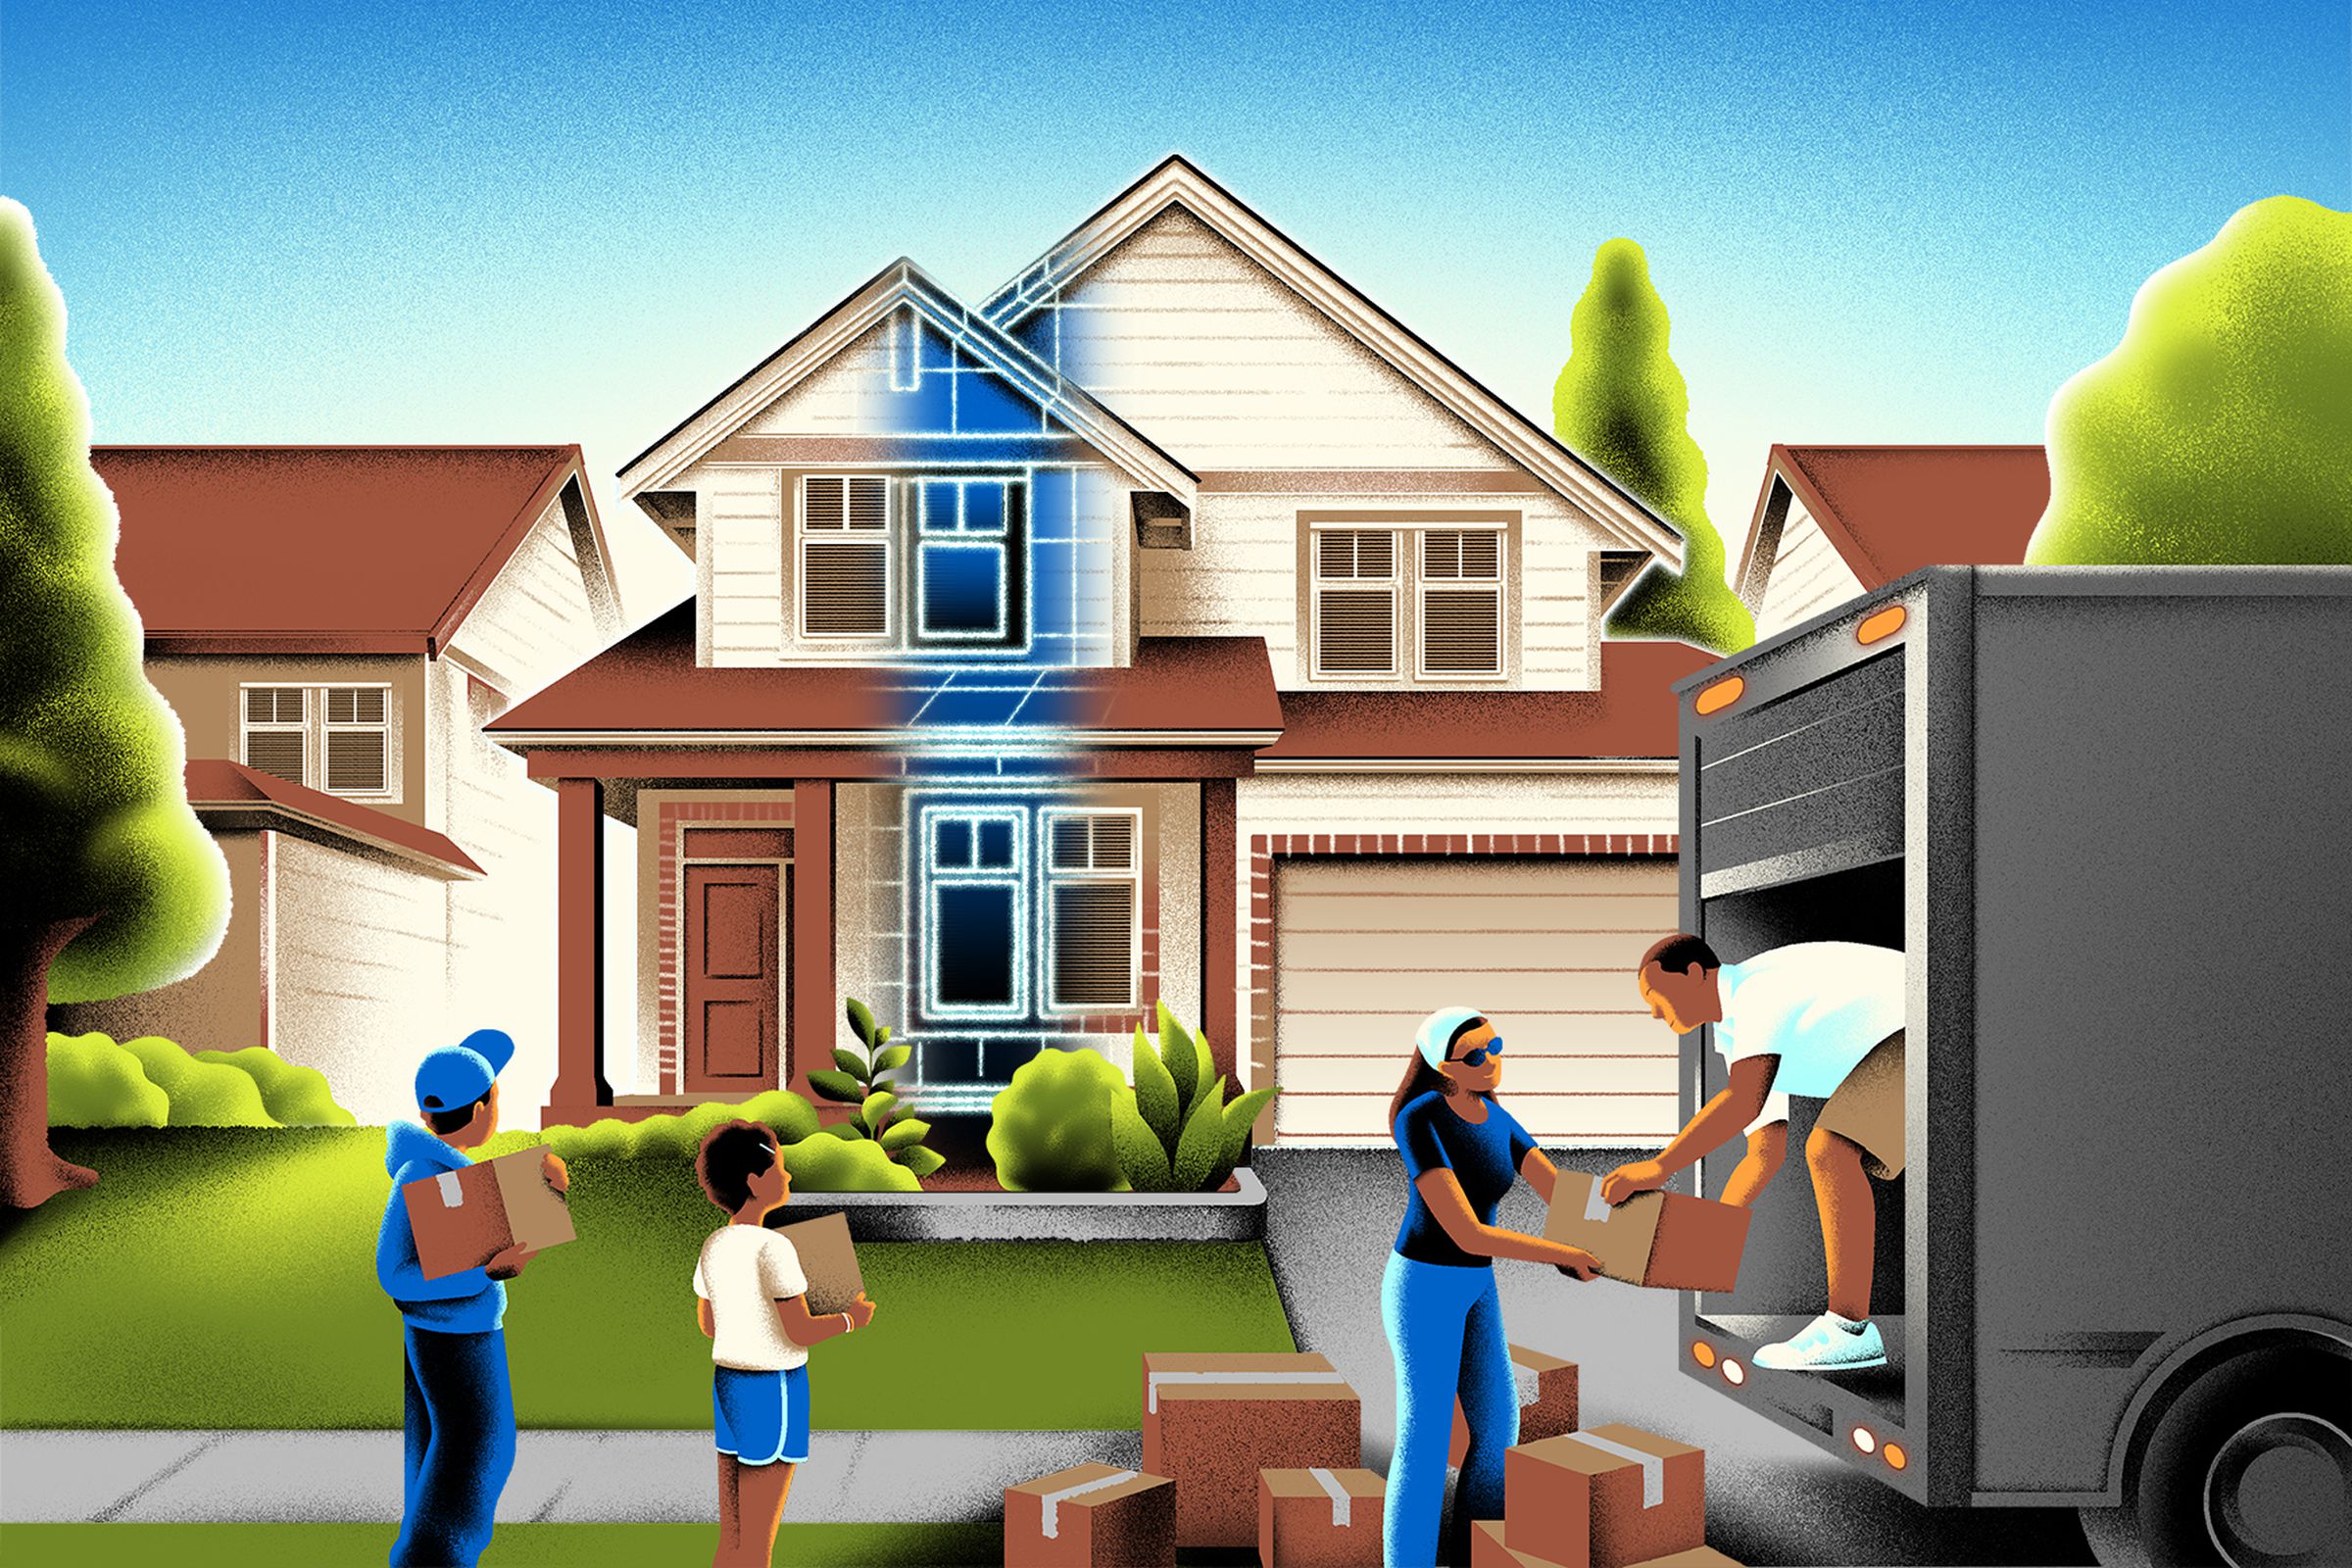 Illustration showing a family moving into a new house equipped with smart tech.